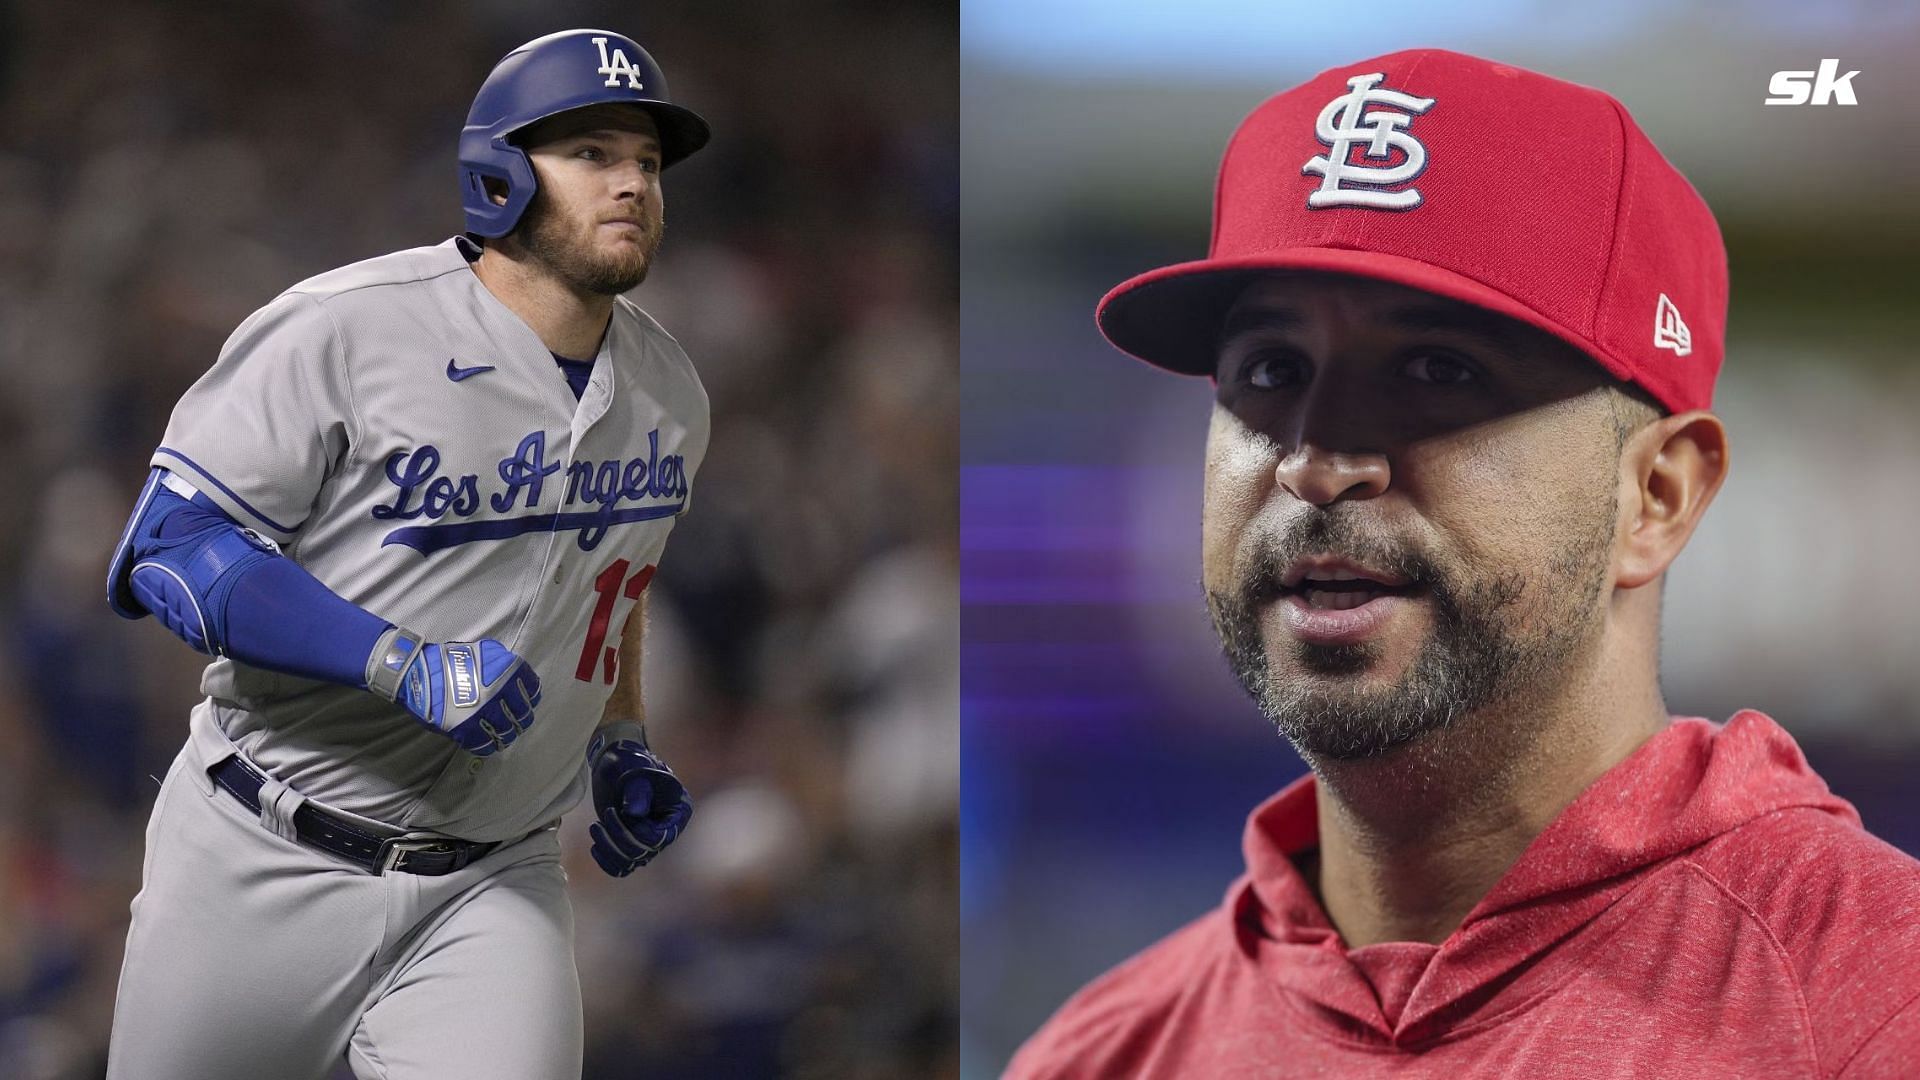 MLB News Today: Max Muncy loses 10lbs prior to Dodgers Korea Series; Pirates land outfielder Michael A. Taylor; Cardinals extend manager Oli Marmol